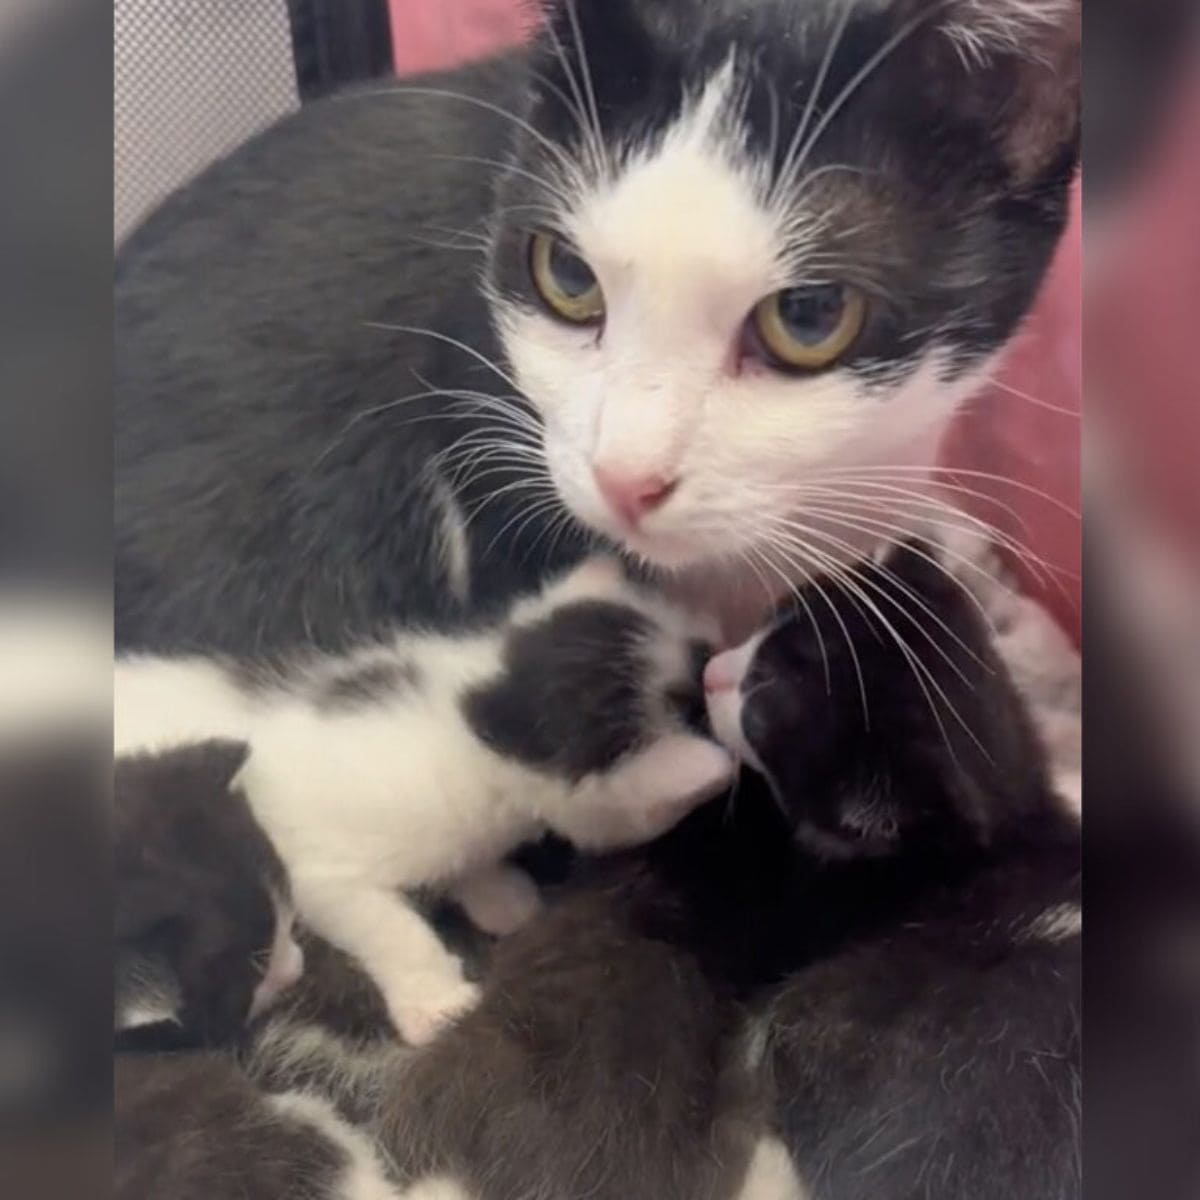 cat mom protects her kitten